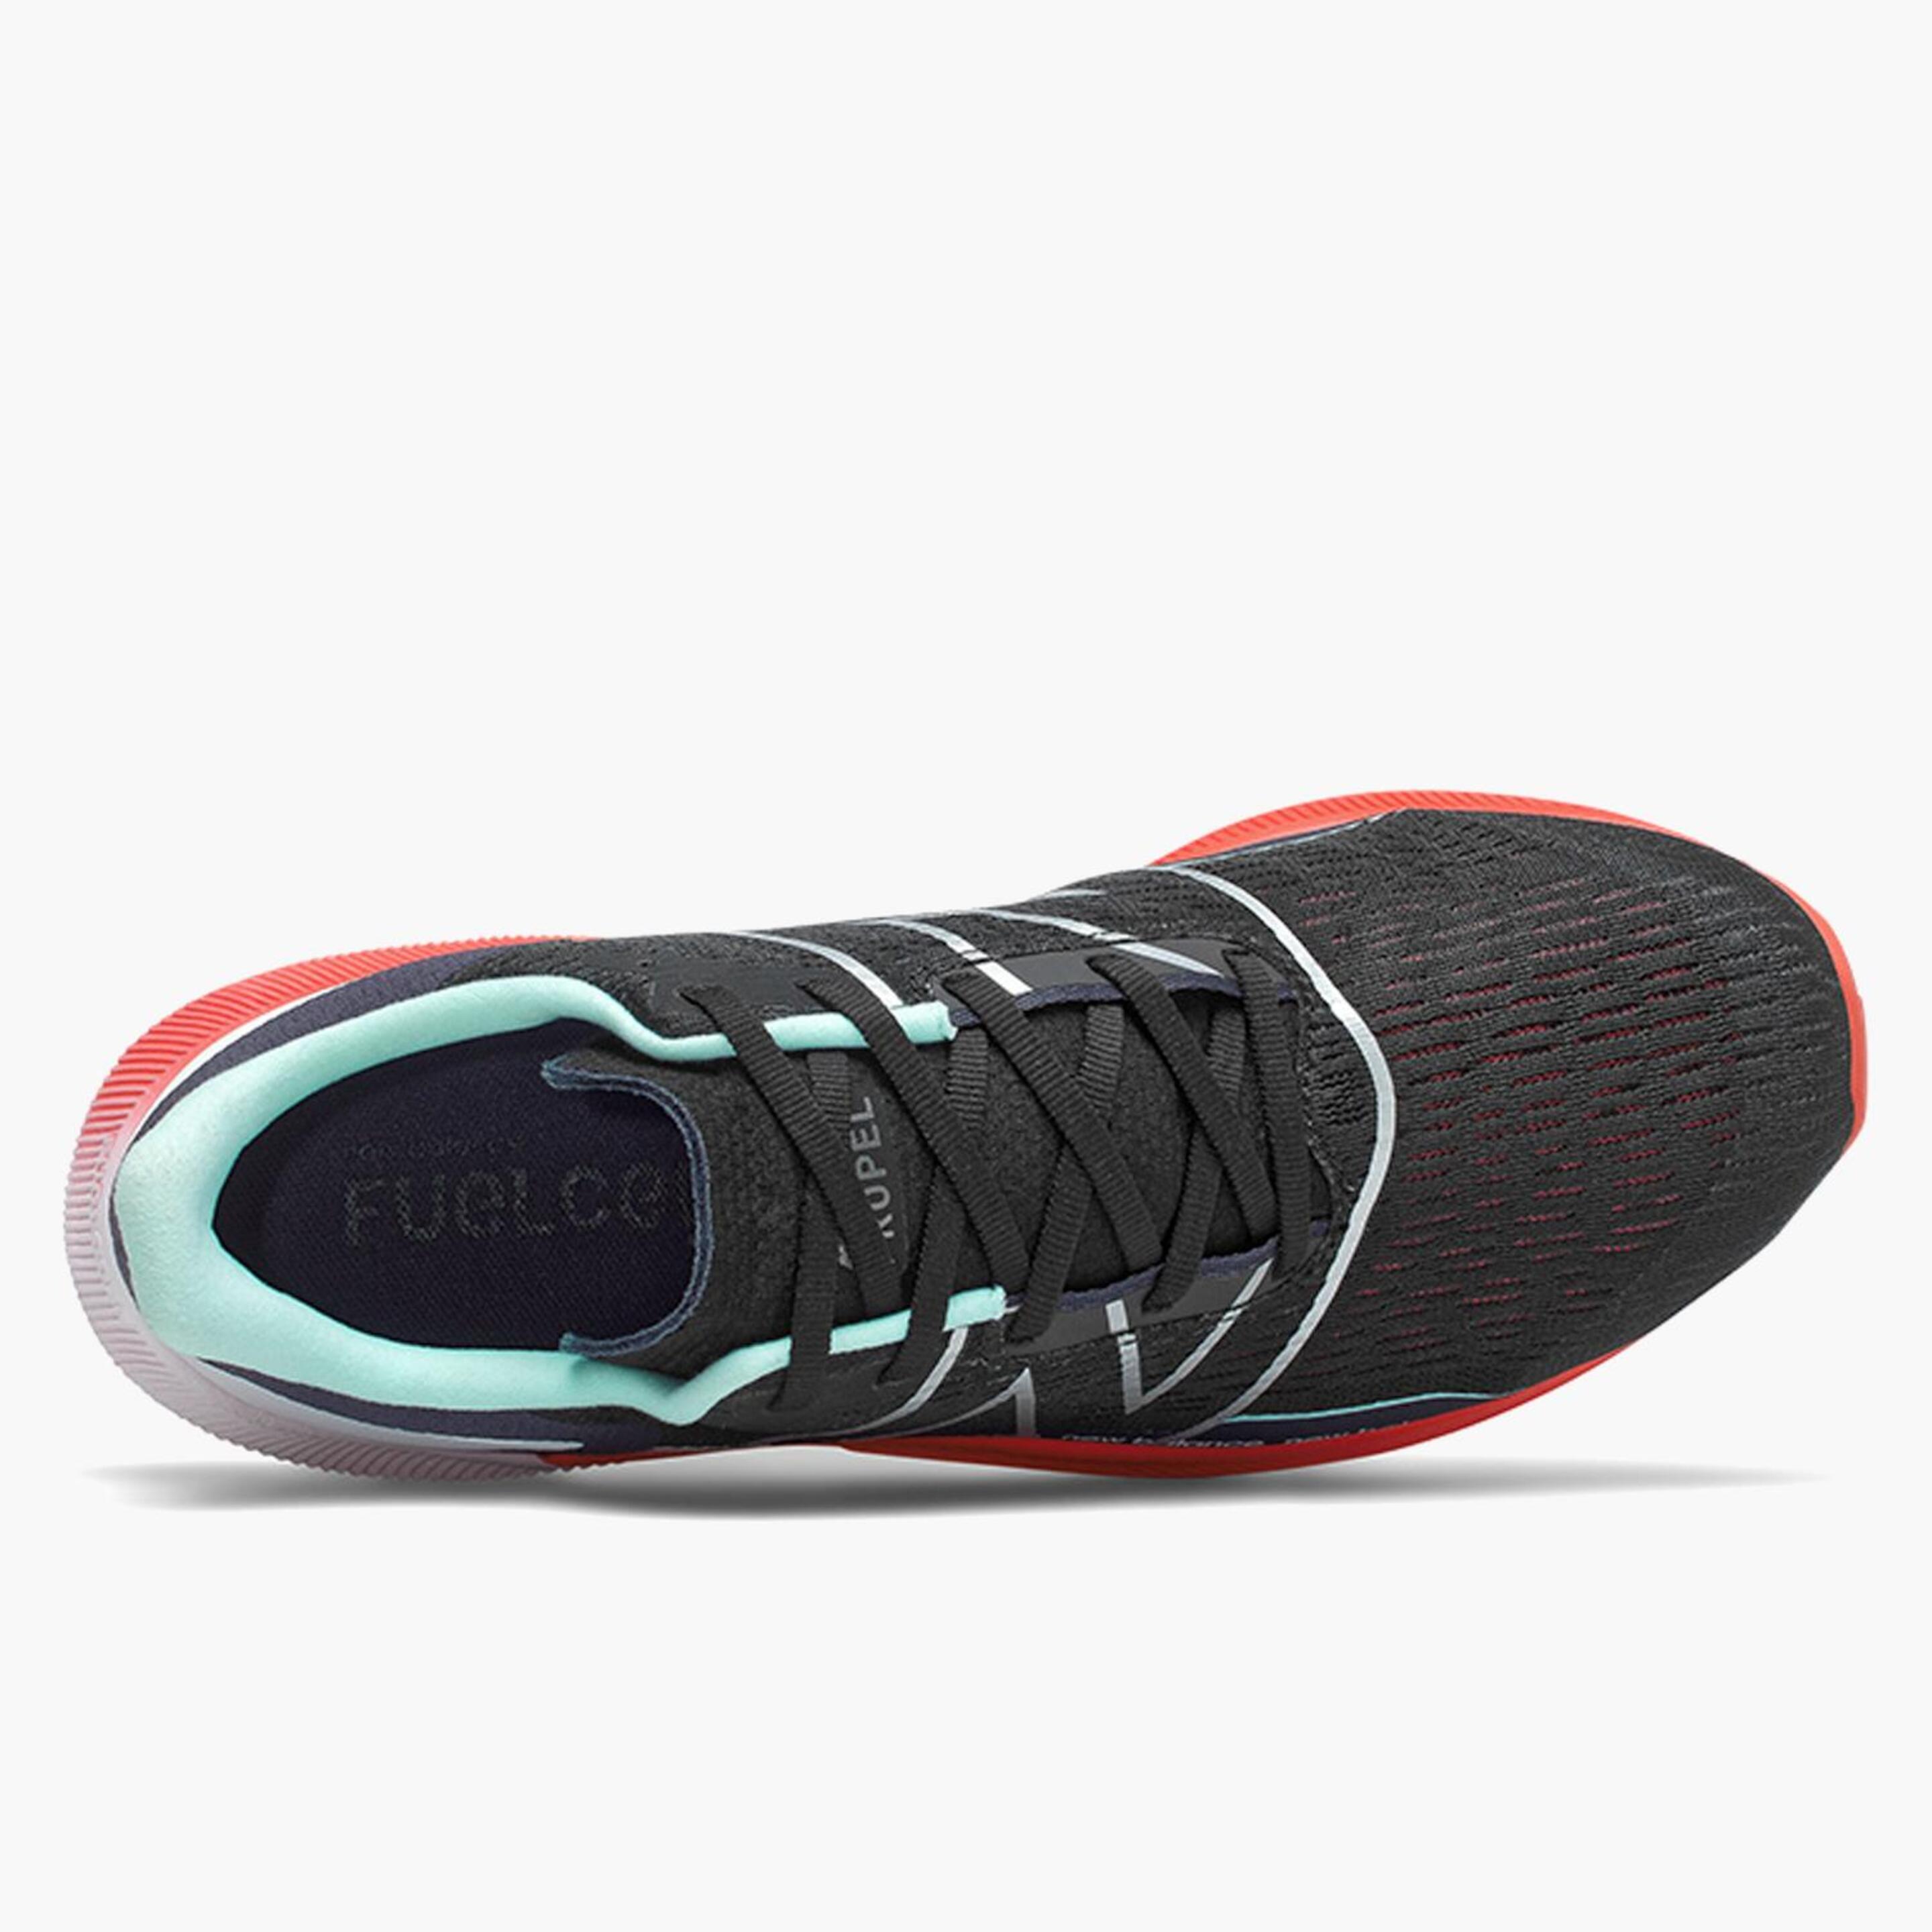 New Balance Fuelcell Propel V2